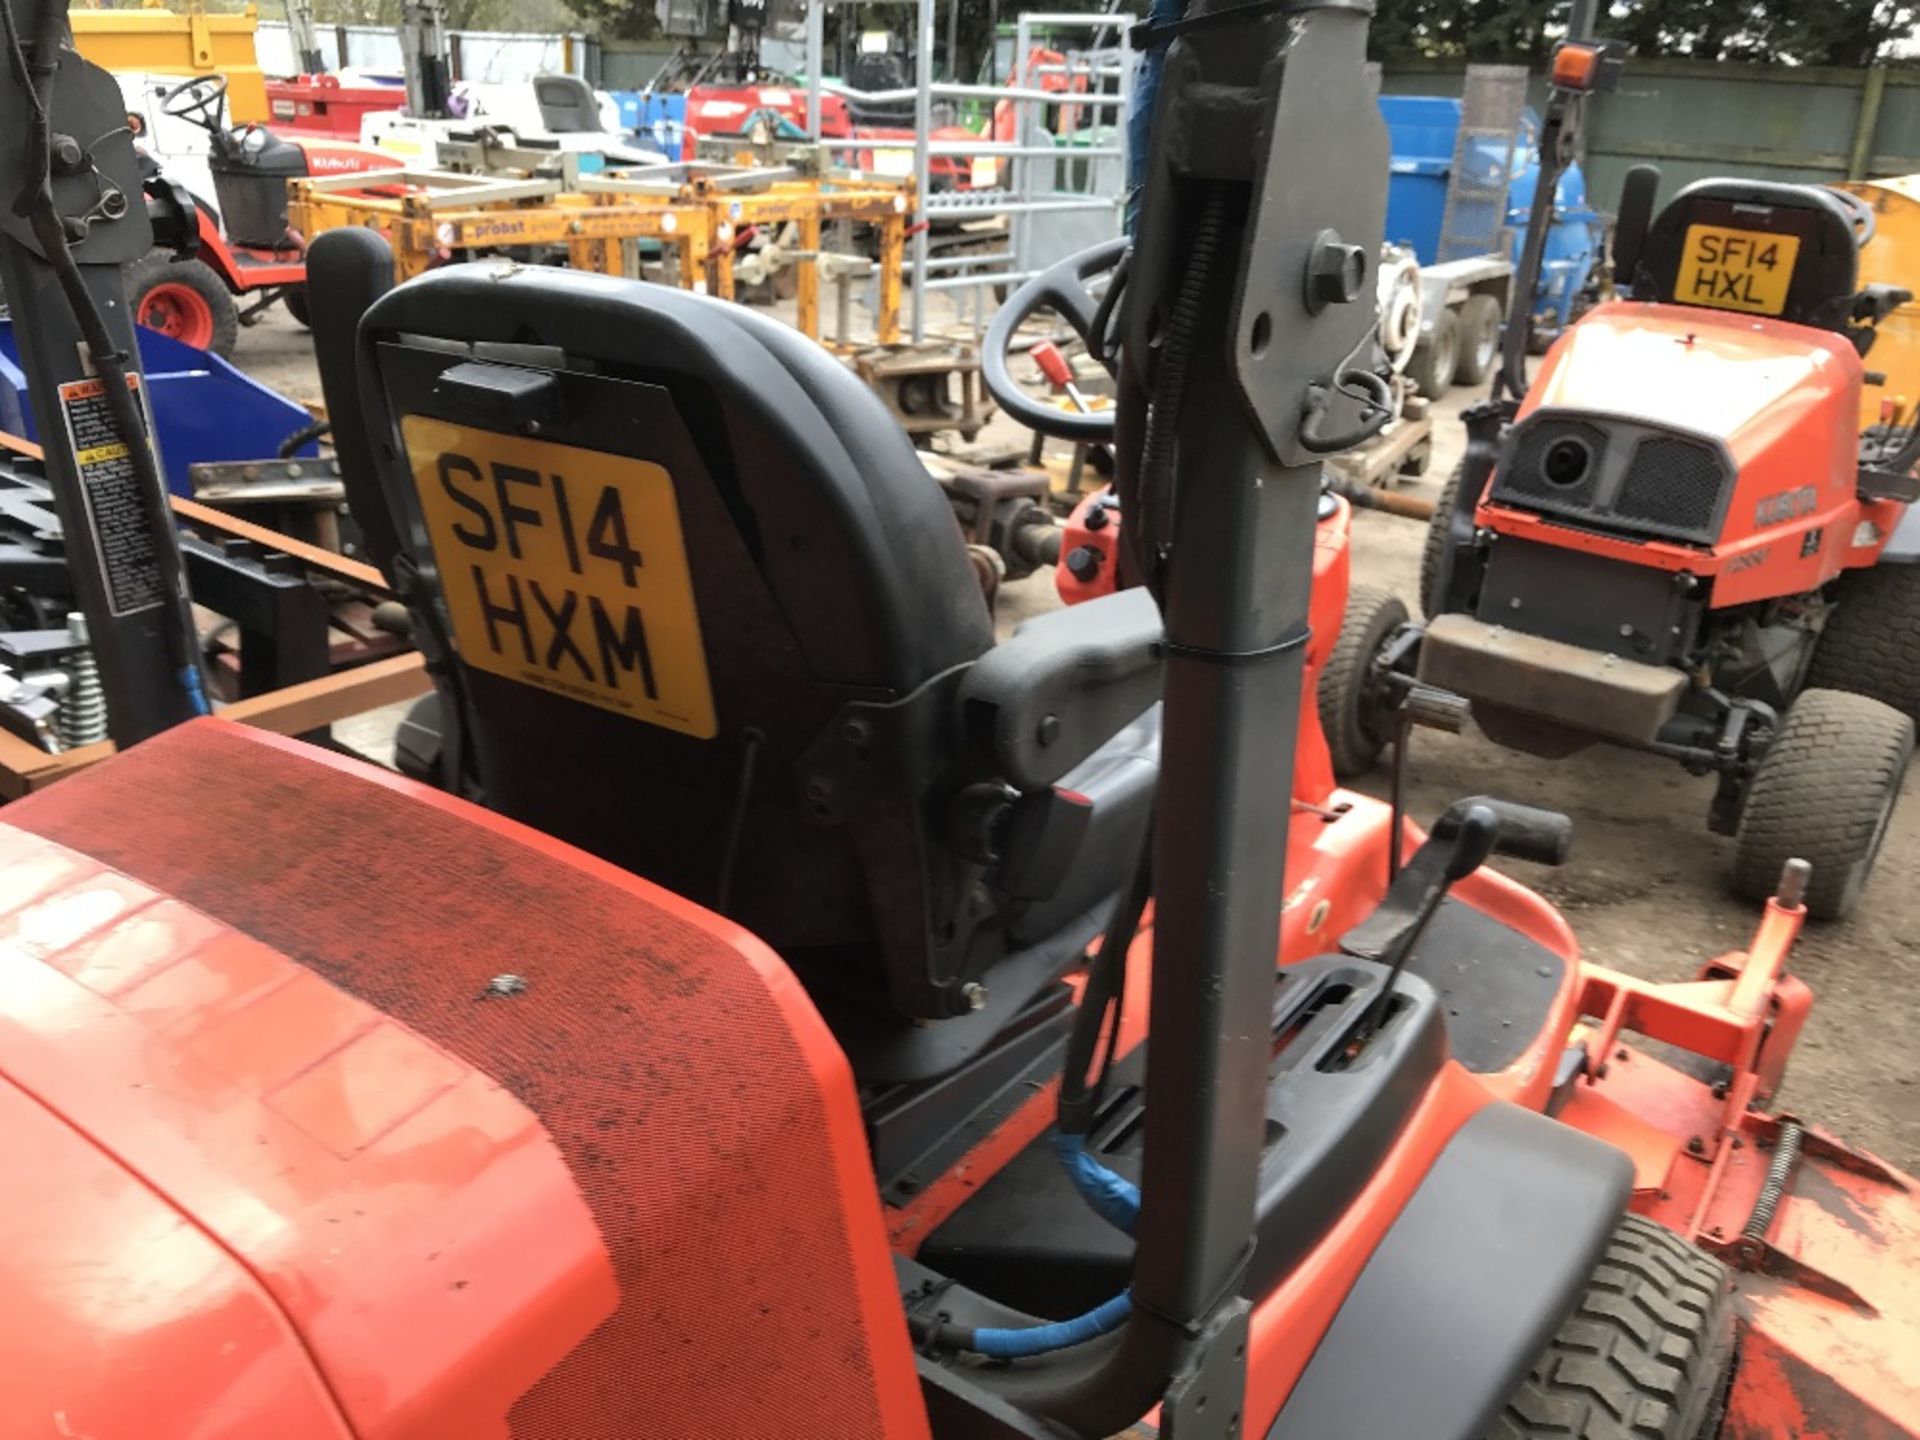 KUBOTA 2880 4WD OUTFRONT MOWER, 2670 REC.HRS. REG: SF14 HXM, V5 TO FOLLOW when tested was seen to - Bild 3 aus 3